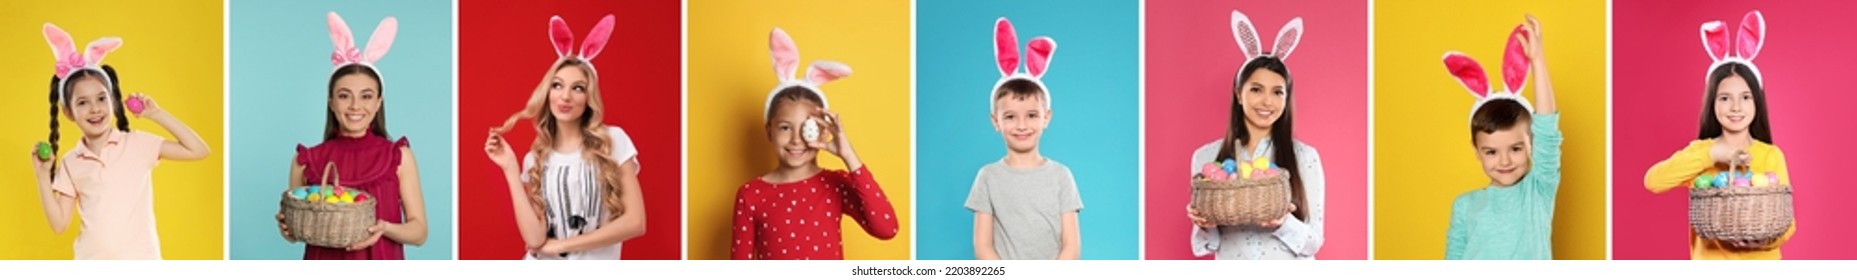 Collage photos of people wearing bunny ears headbands on different color backgrounds, banner design. Happy Easter - Shutterstock ID 2203892265